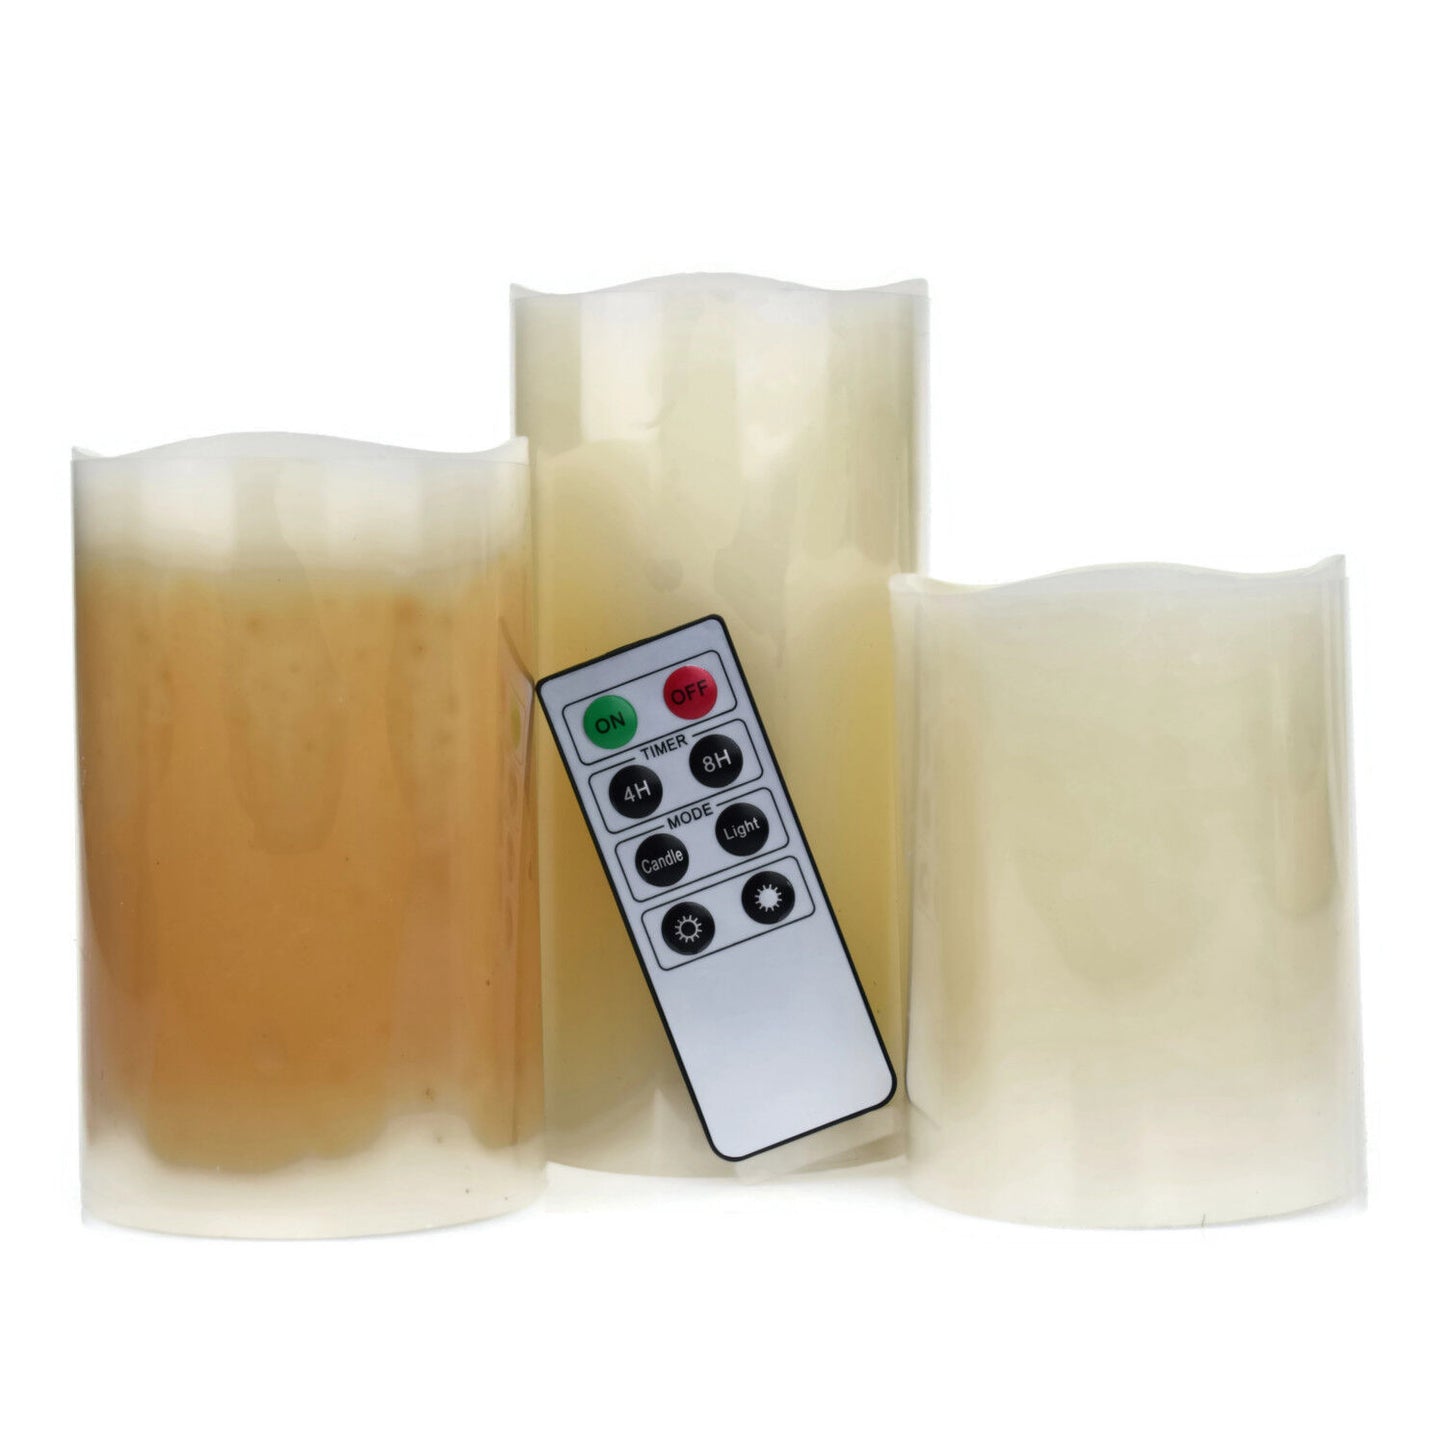 Remote Controlled Flameless Coloured Candles Cinnamon, Vanilla and Fresh Linen